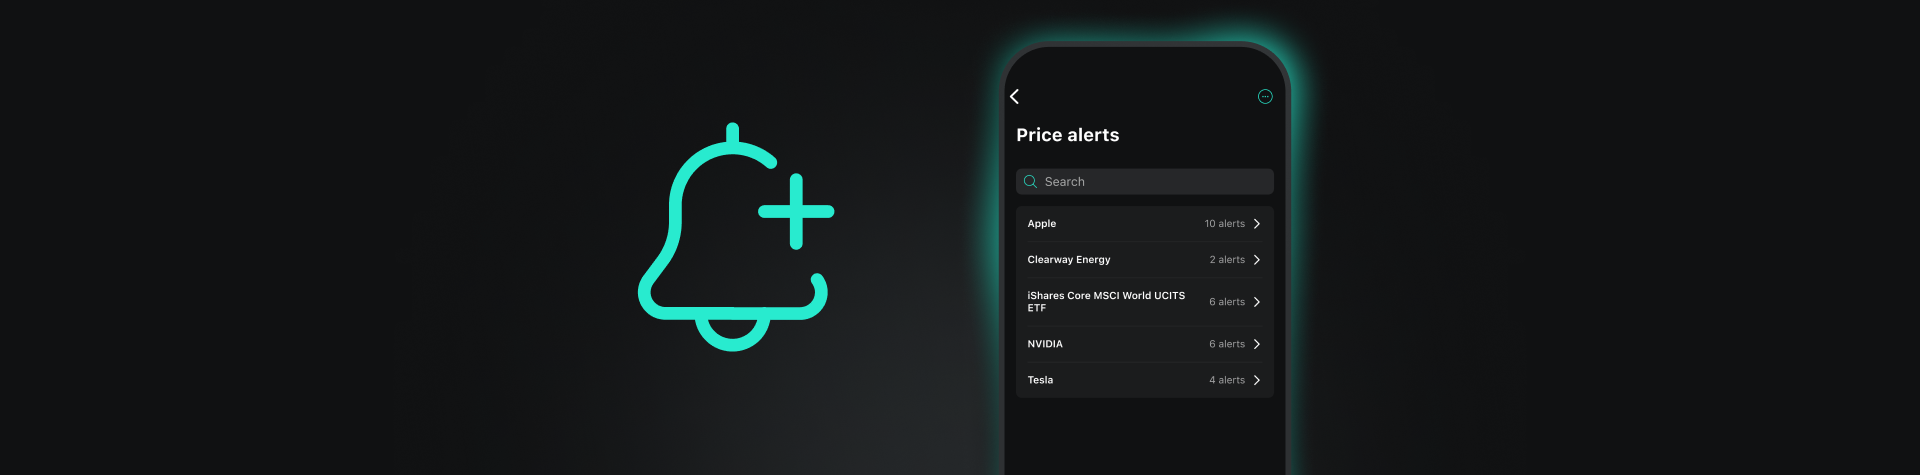 Asset_Blog_New_Price_Alerts_Overview_1920